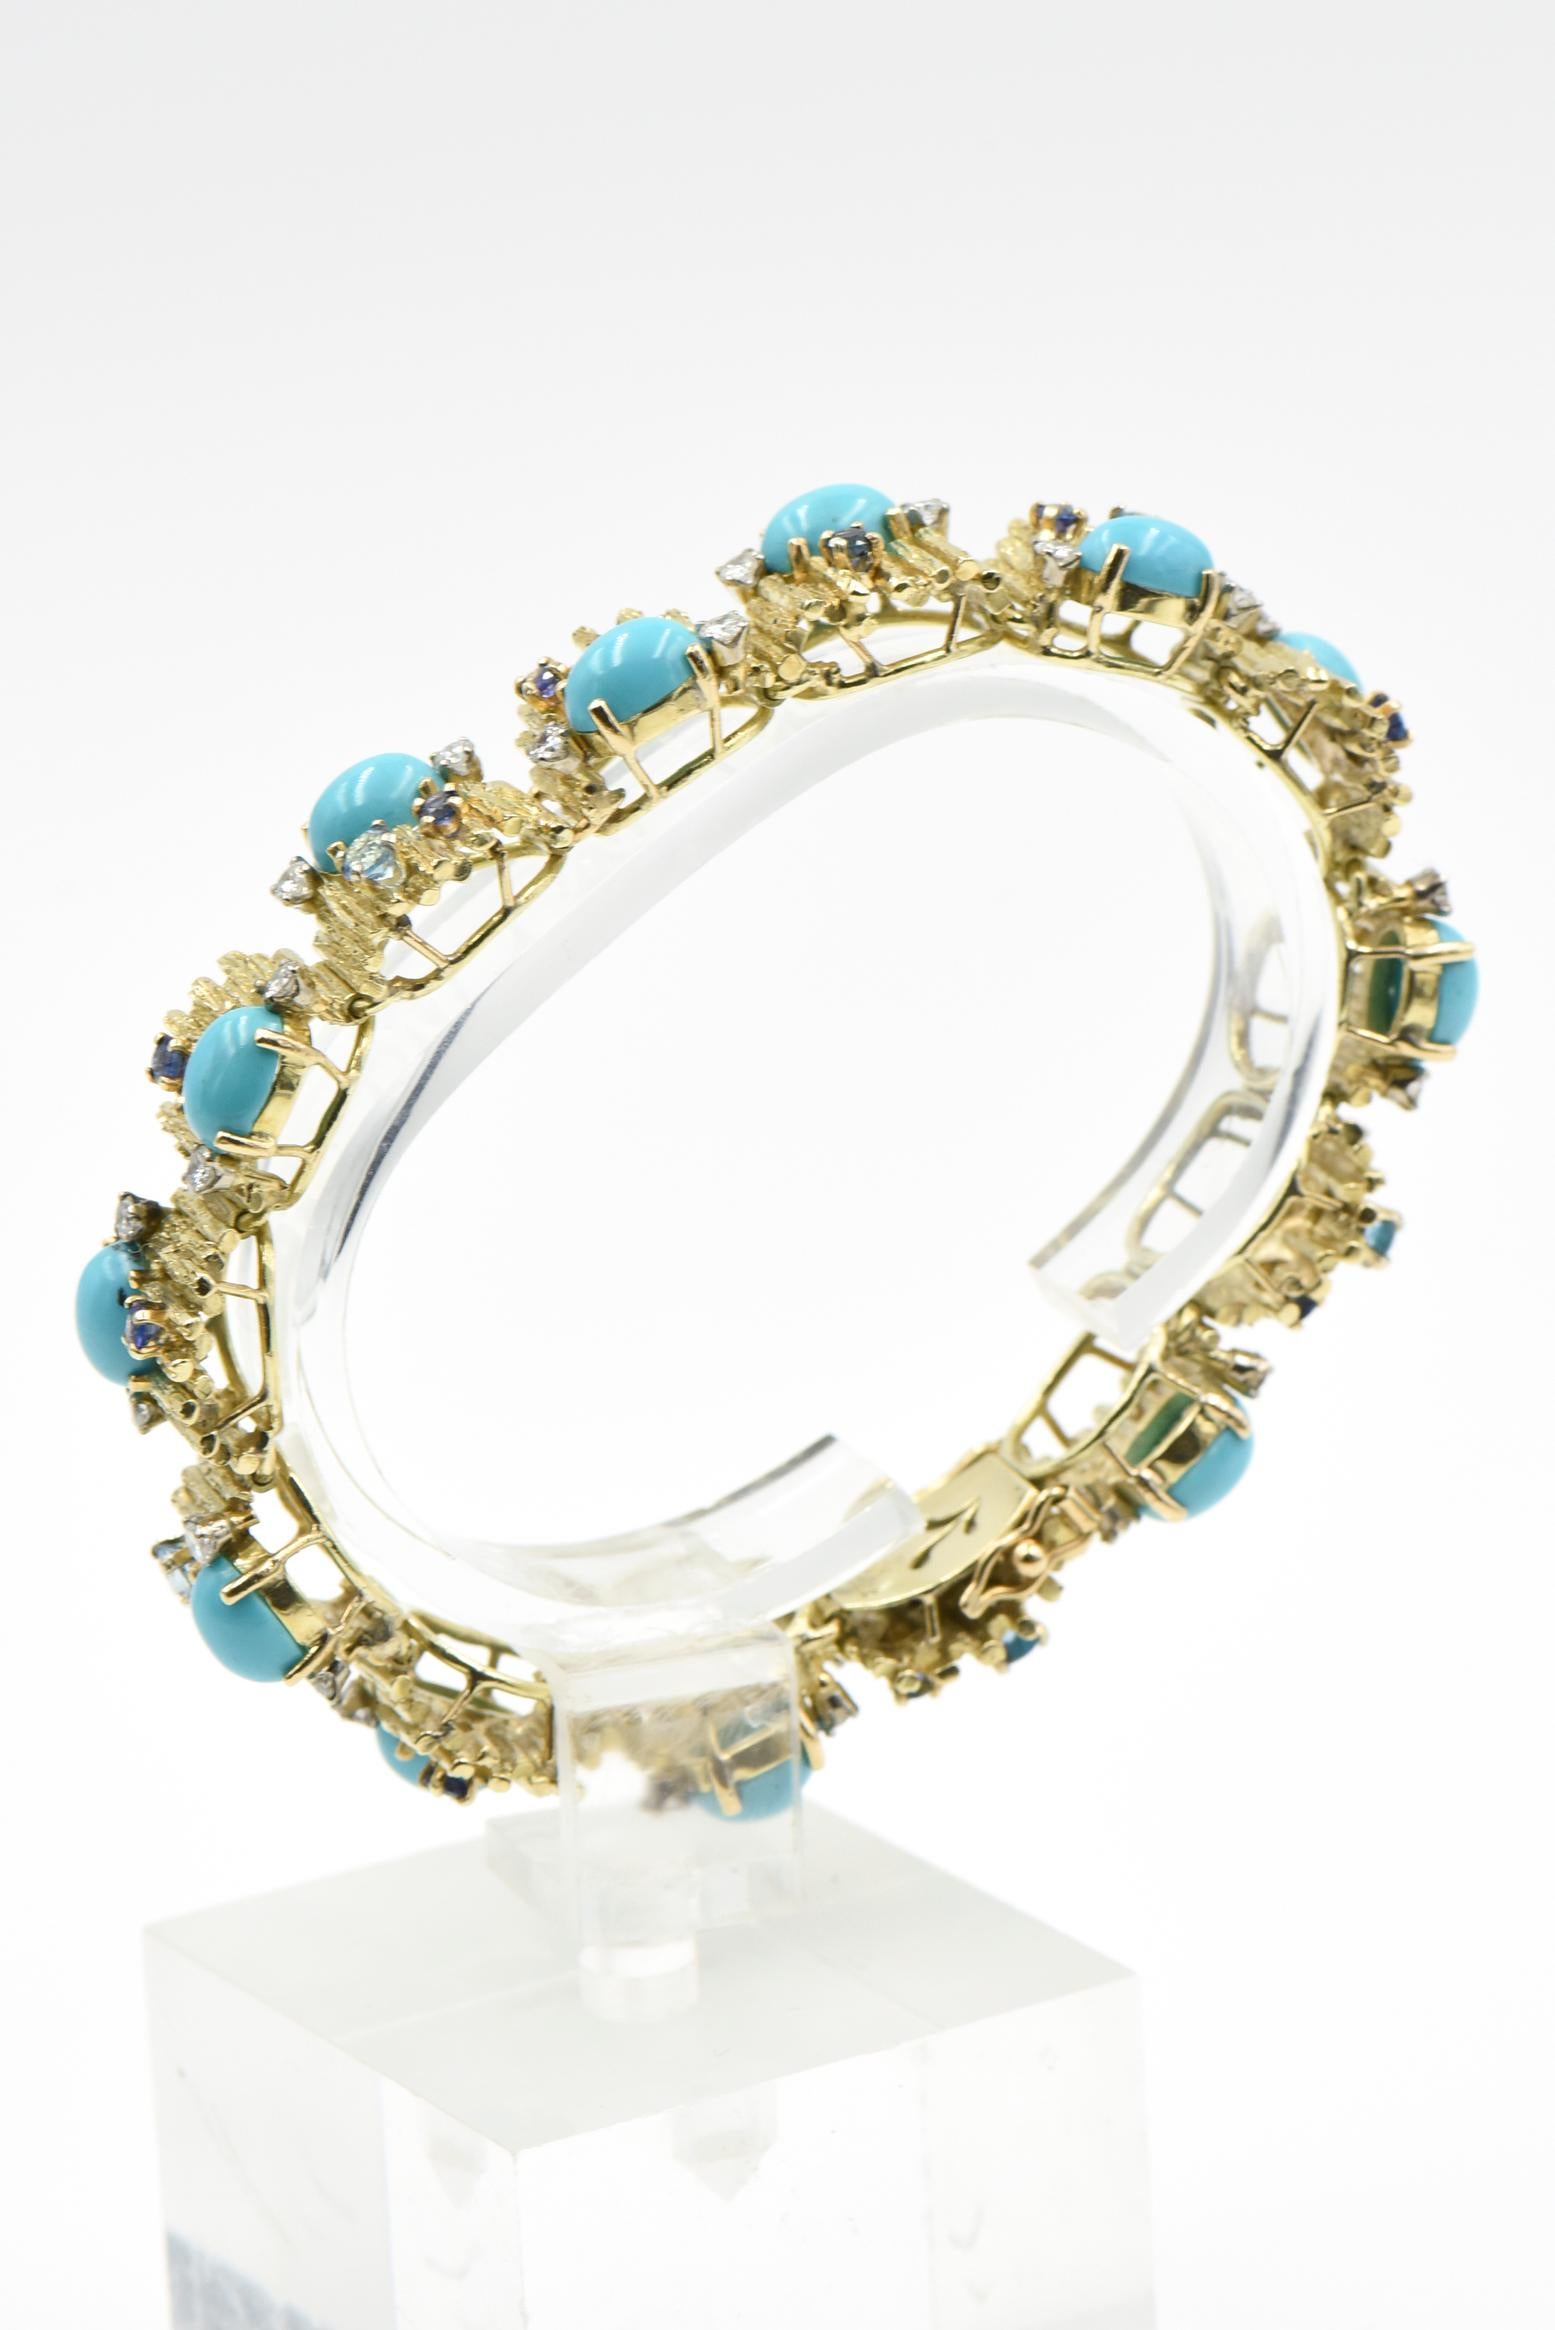 Wonderful 1960's bracelet by Jack Gutschneider features bark finish links accented by cabochon turquoise pieces and facetted sapphires, blue topaz and diamonds mounted in 14k yellow gold.   Bracelet is 7